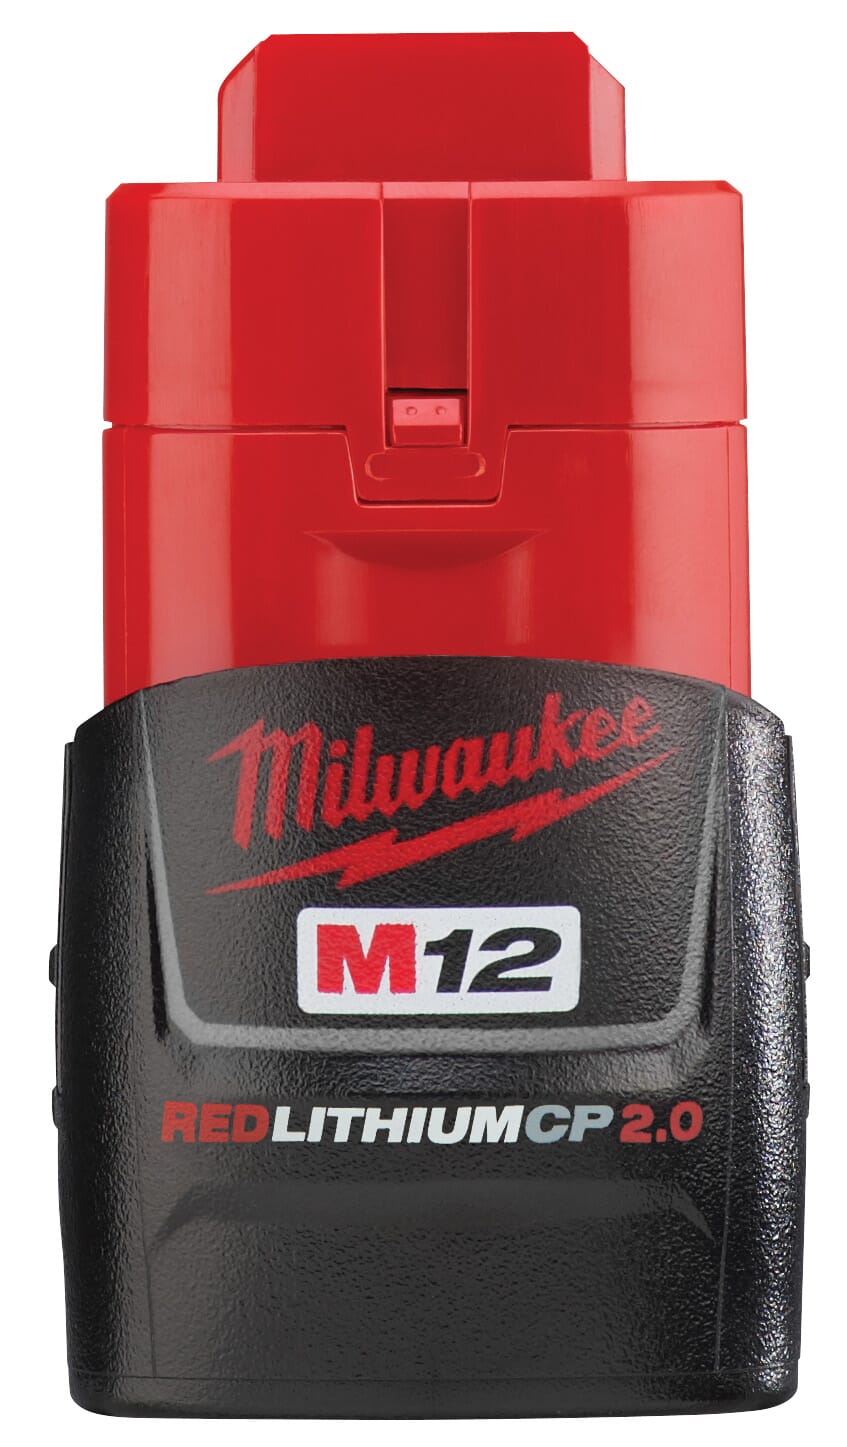 Milwaukee® M12™ 48-11-2411 Compact Rechargeable Cordless Battery Pack, 1.5 Ah Lithium-Ion Battery, 12 VDC Charge, For Use With M12™ Cordless Power Tool